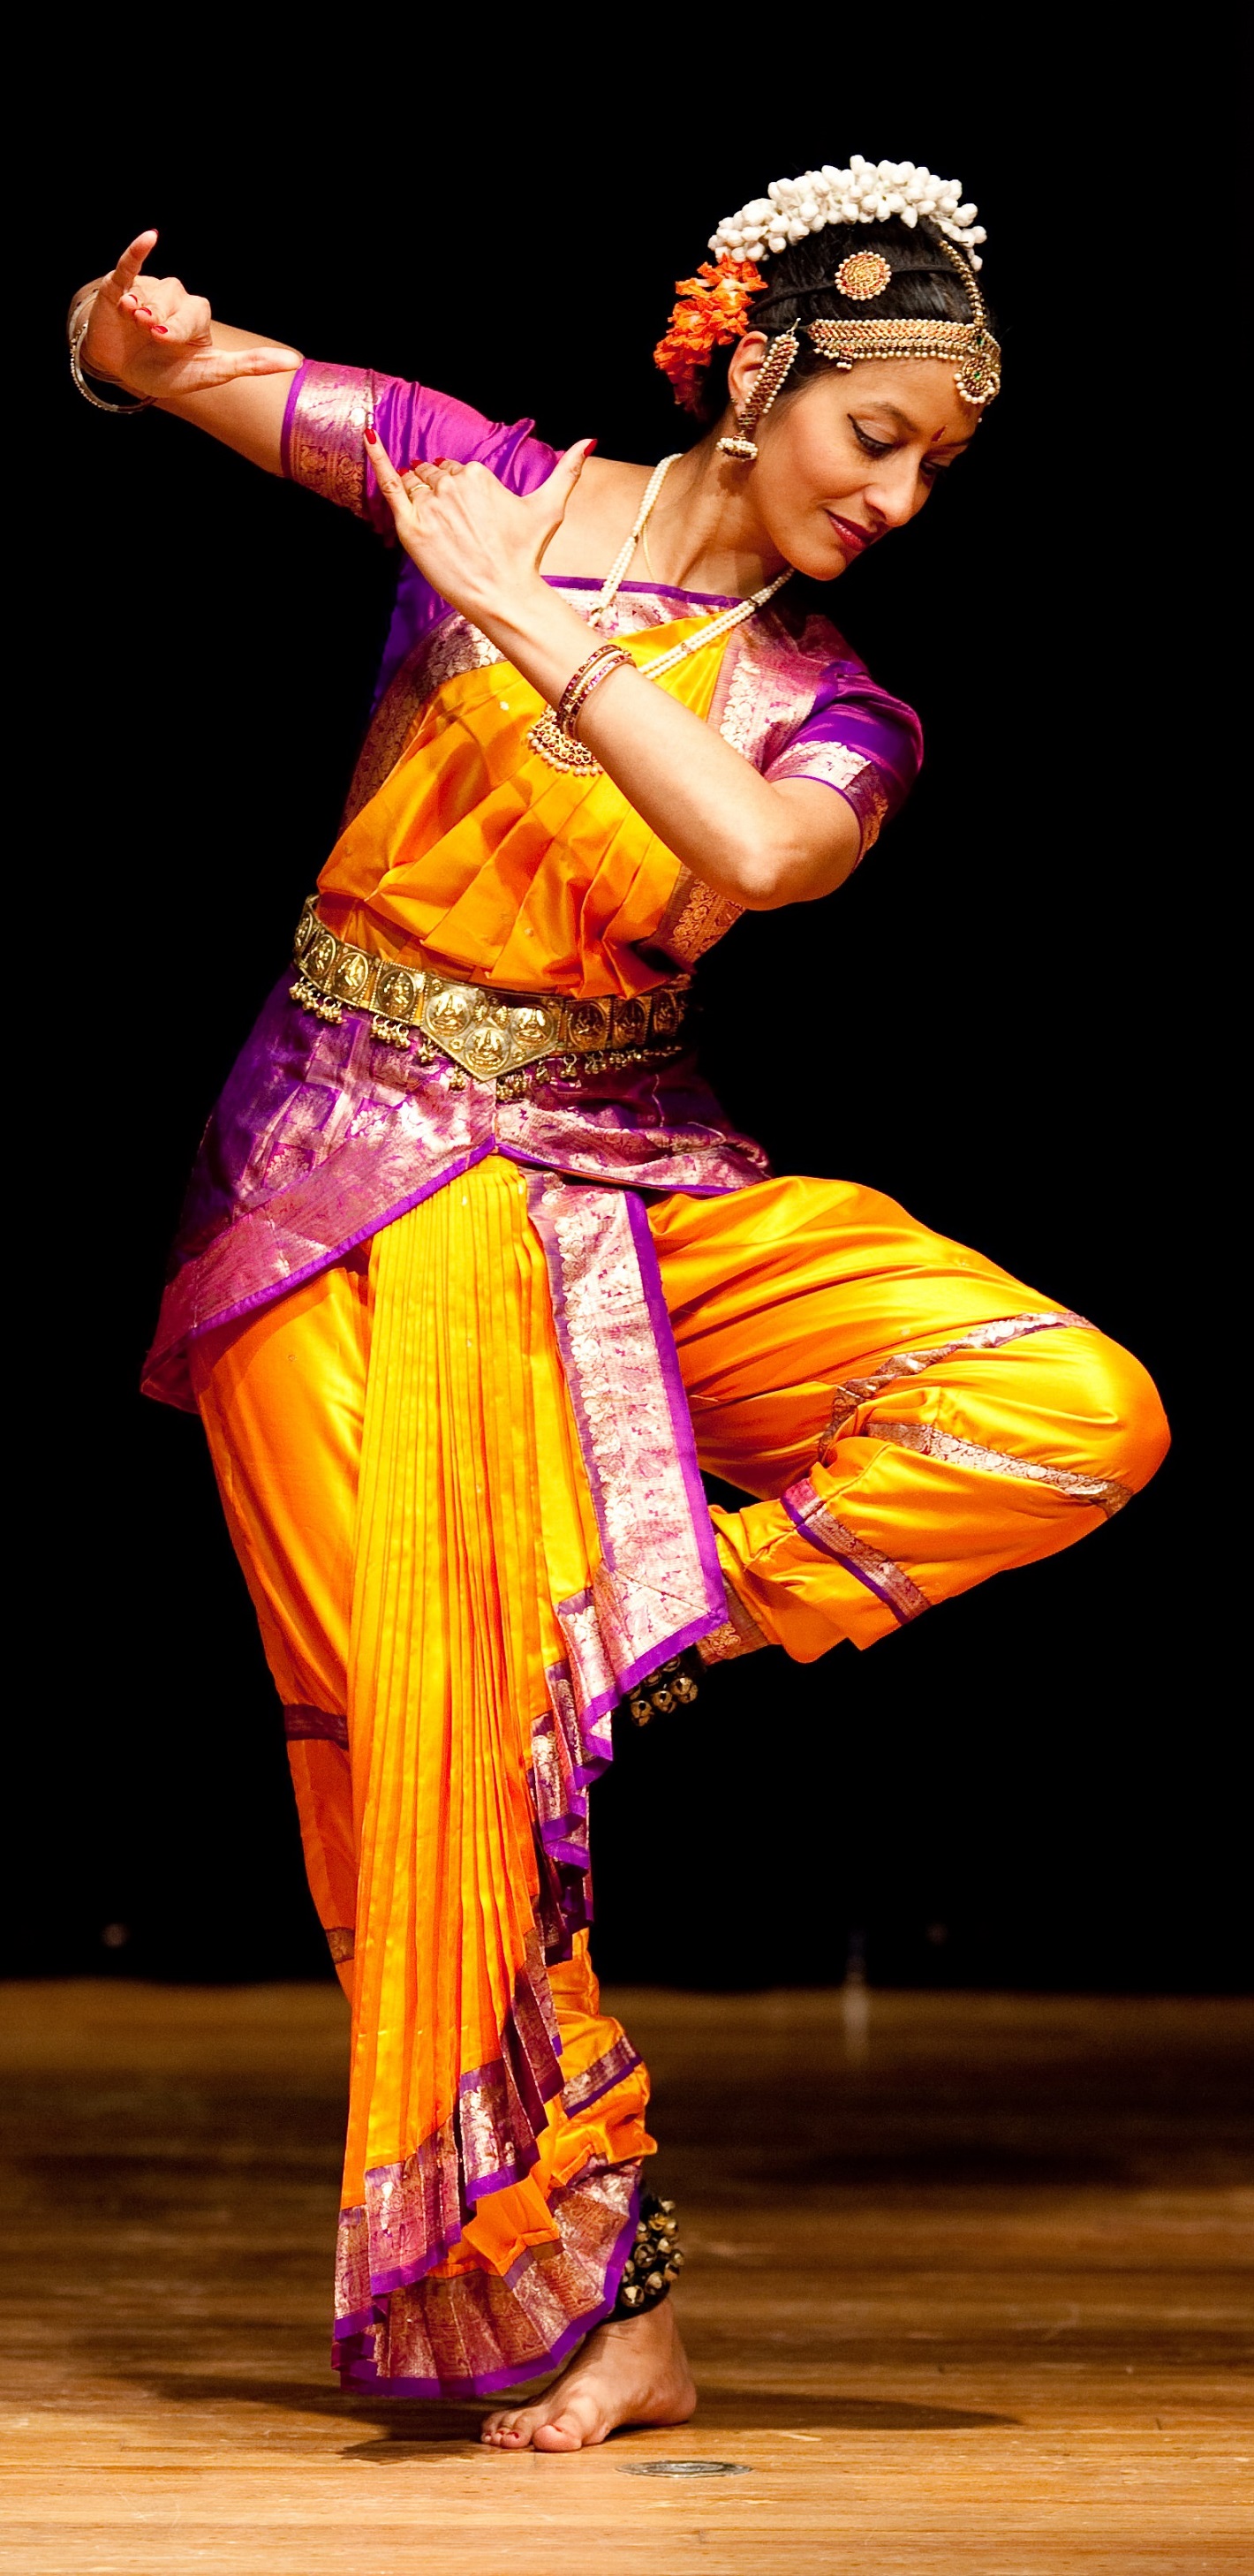 Close up shot, bharatanatyam dancer showing mudra or hand gestures on stage  - cocnept of Indian culture, classical dancer and tradition. Stock Photo by  ©Lakshmiprasad 550138916